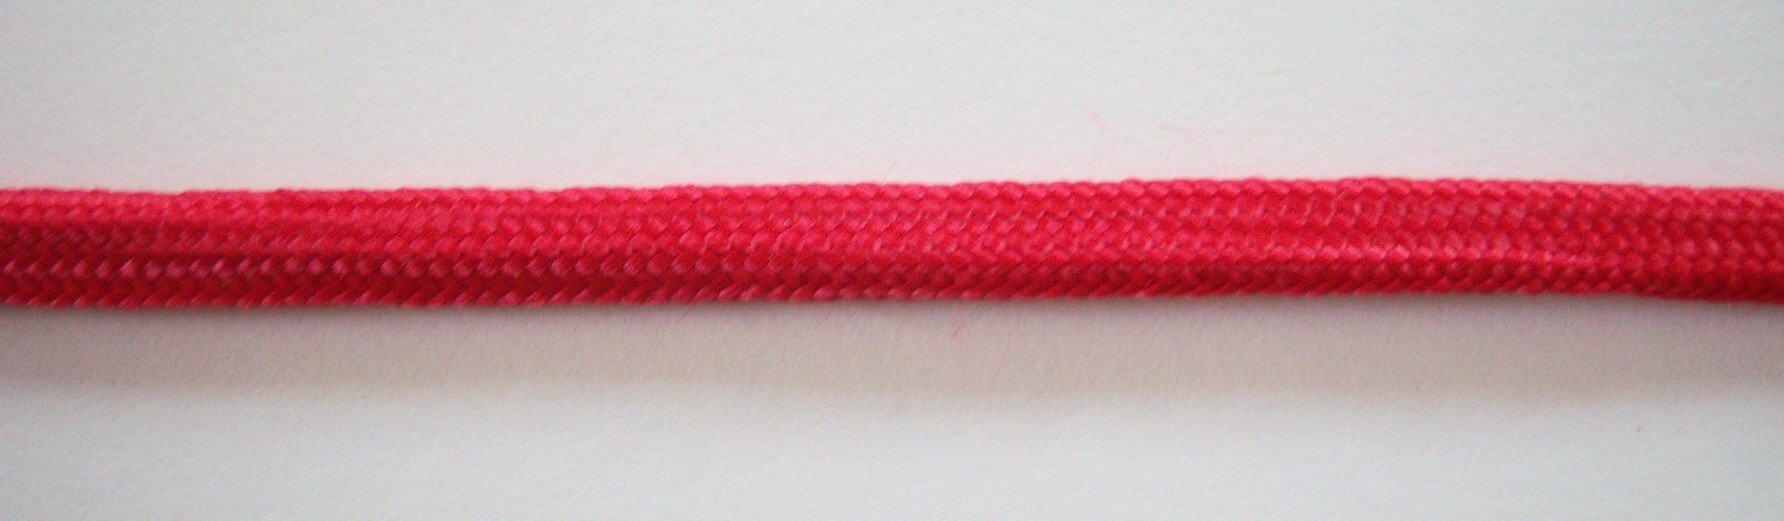 Red Nylon 1/4" Covered Cotton Cord